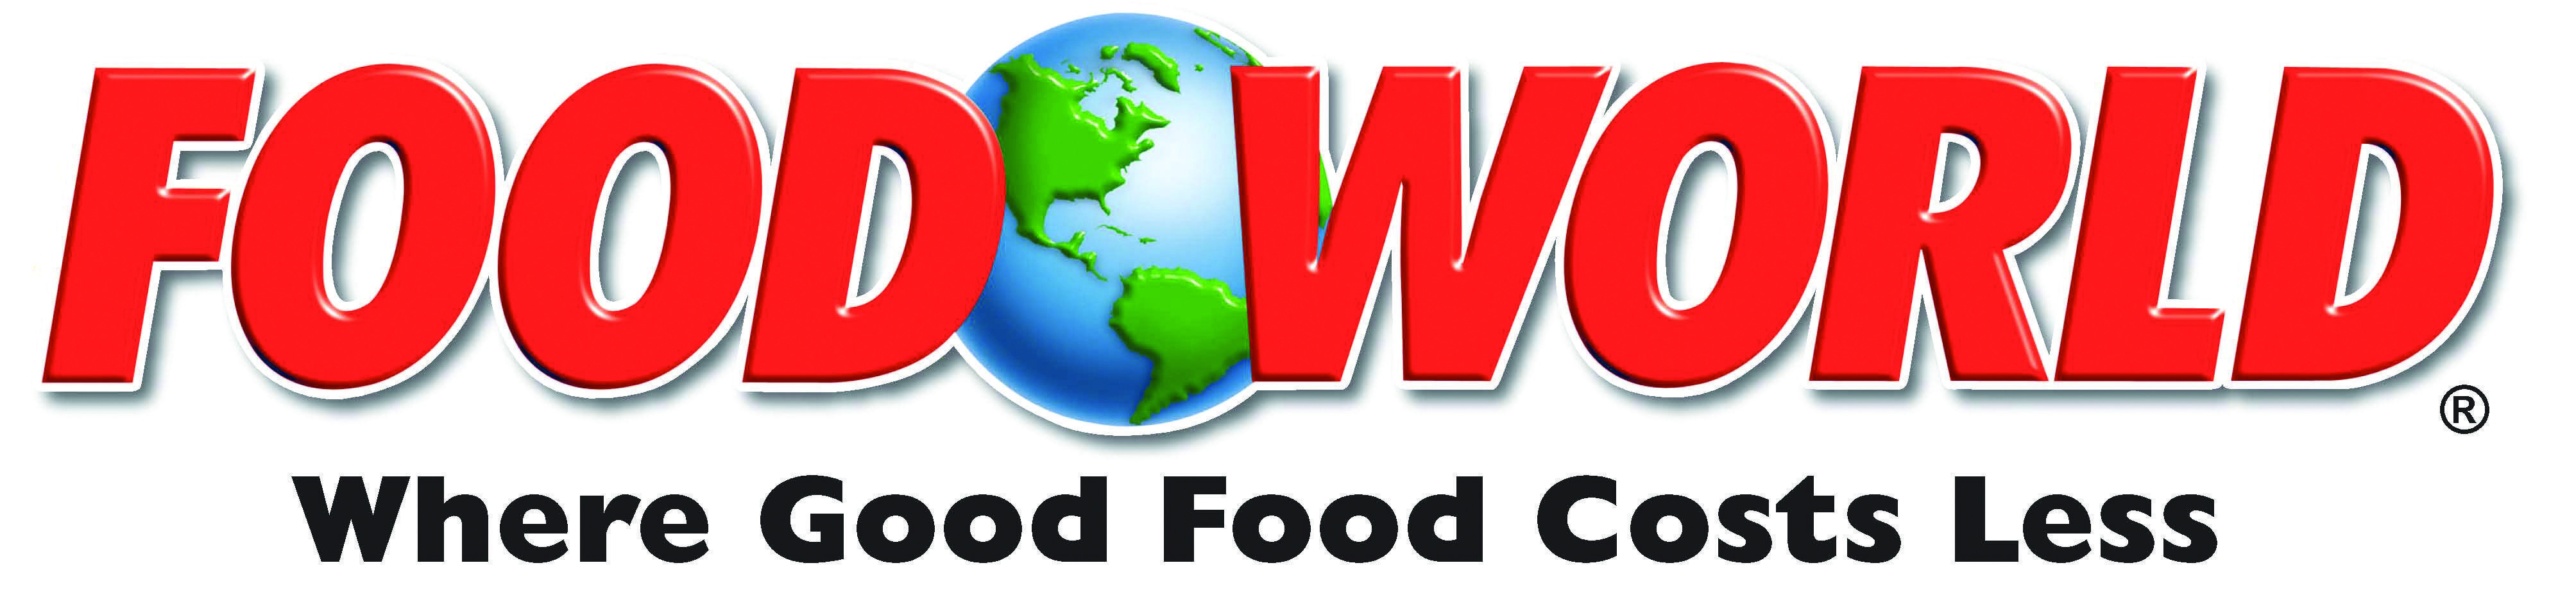 Food World Logo - Three Former Harvey's Stores in Georgia to Re-Open as Food World